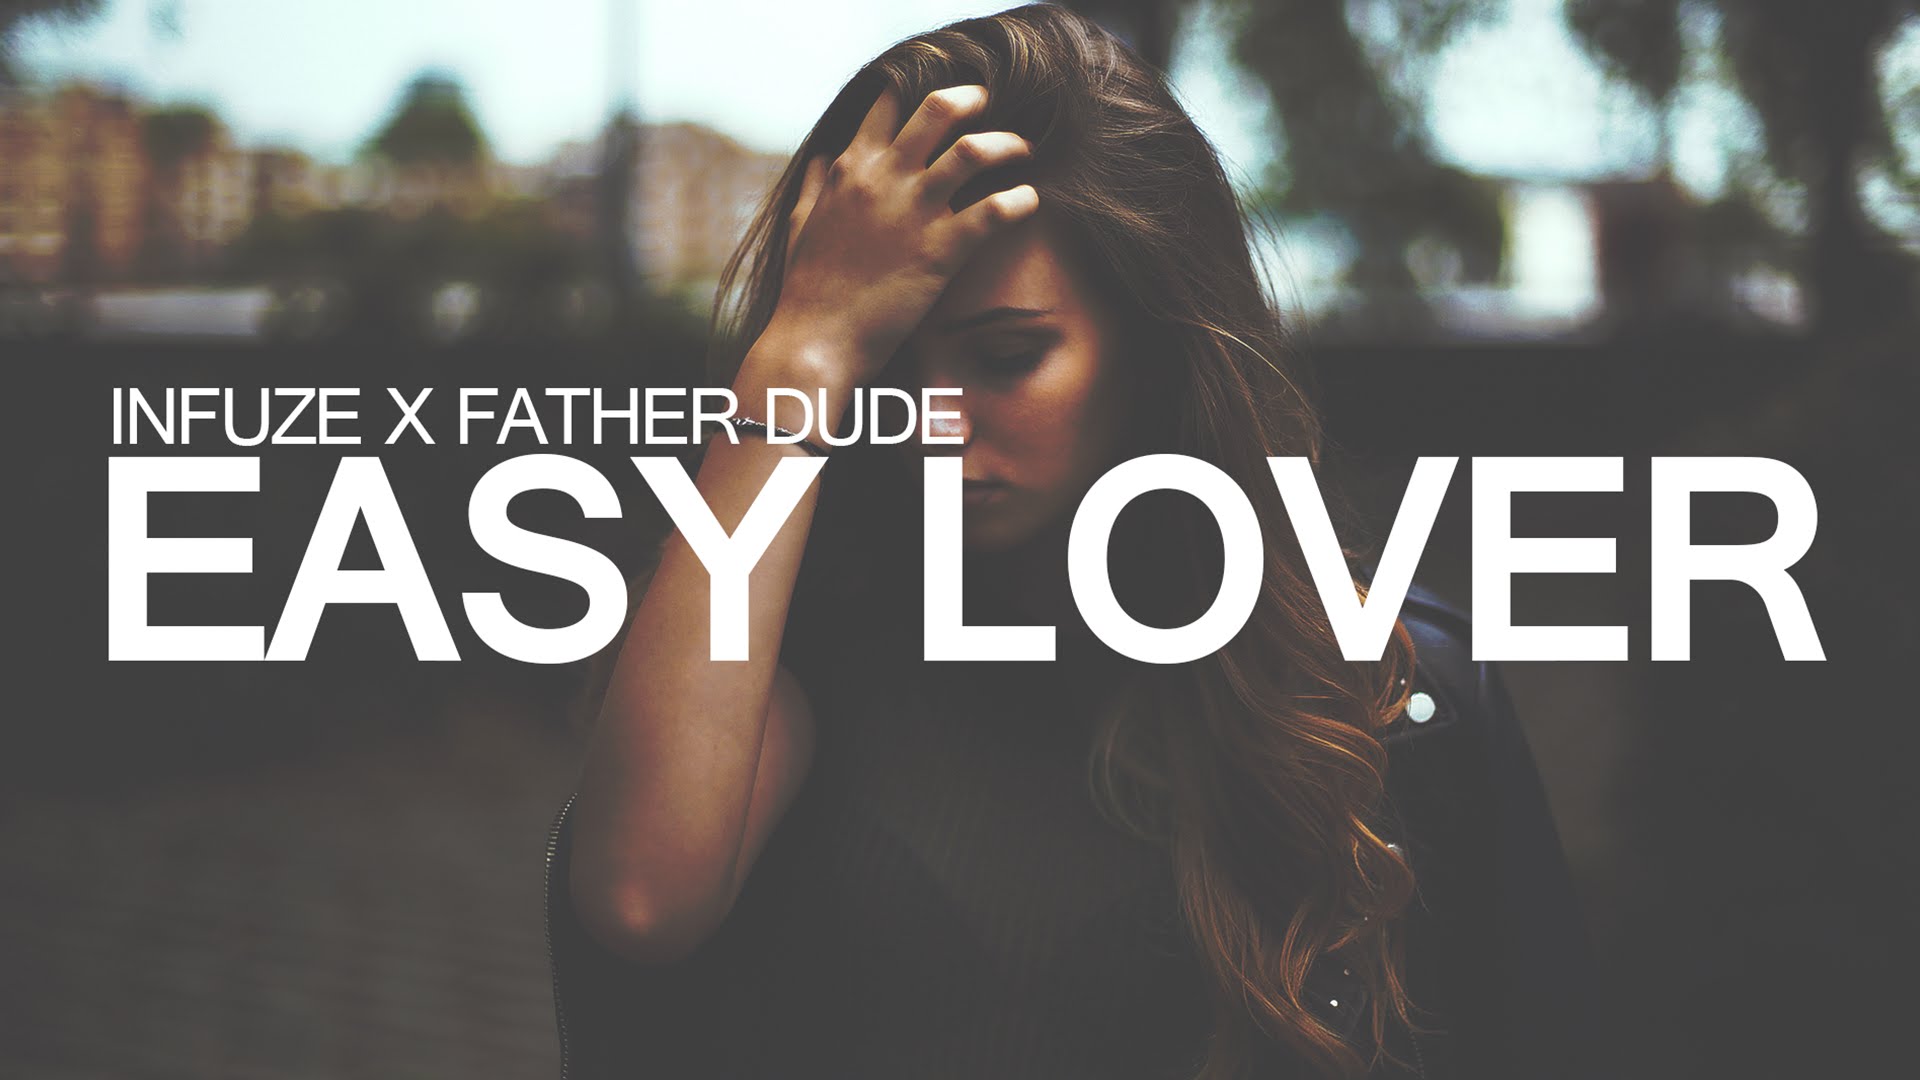 Infuze X Father Dude - Easy Lover - YouTube